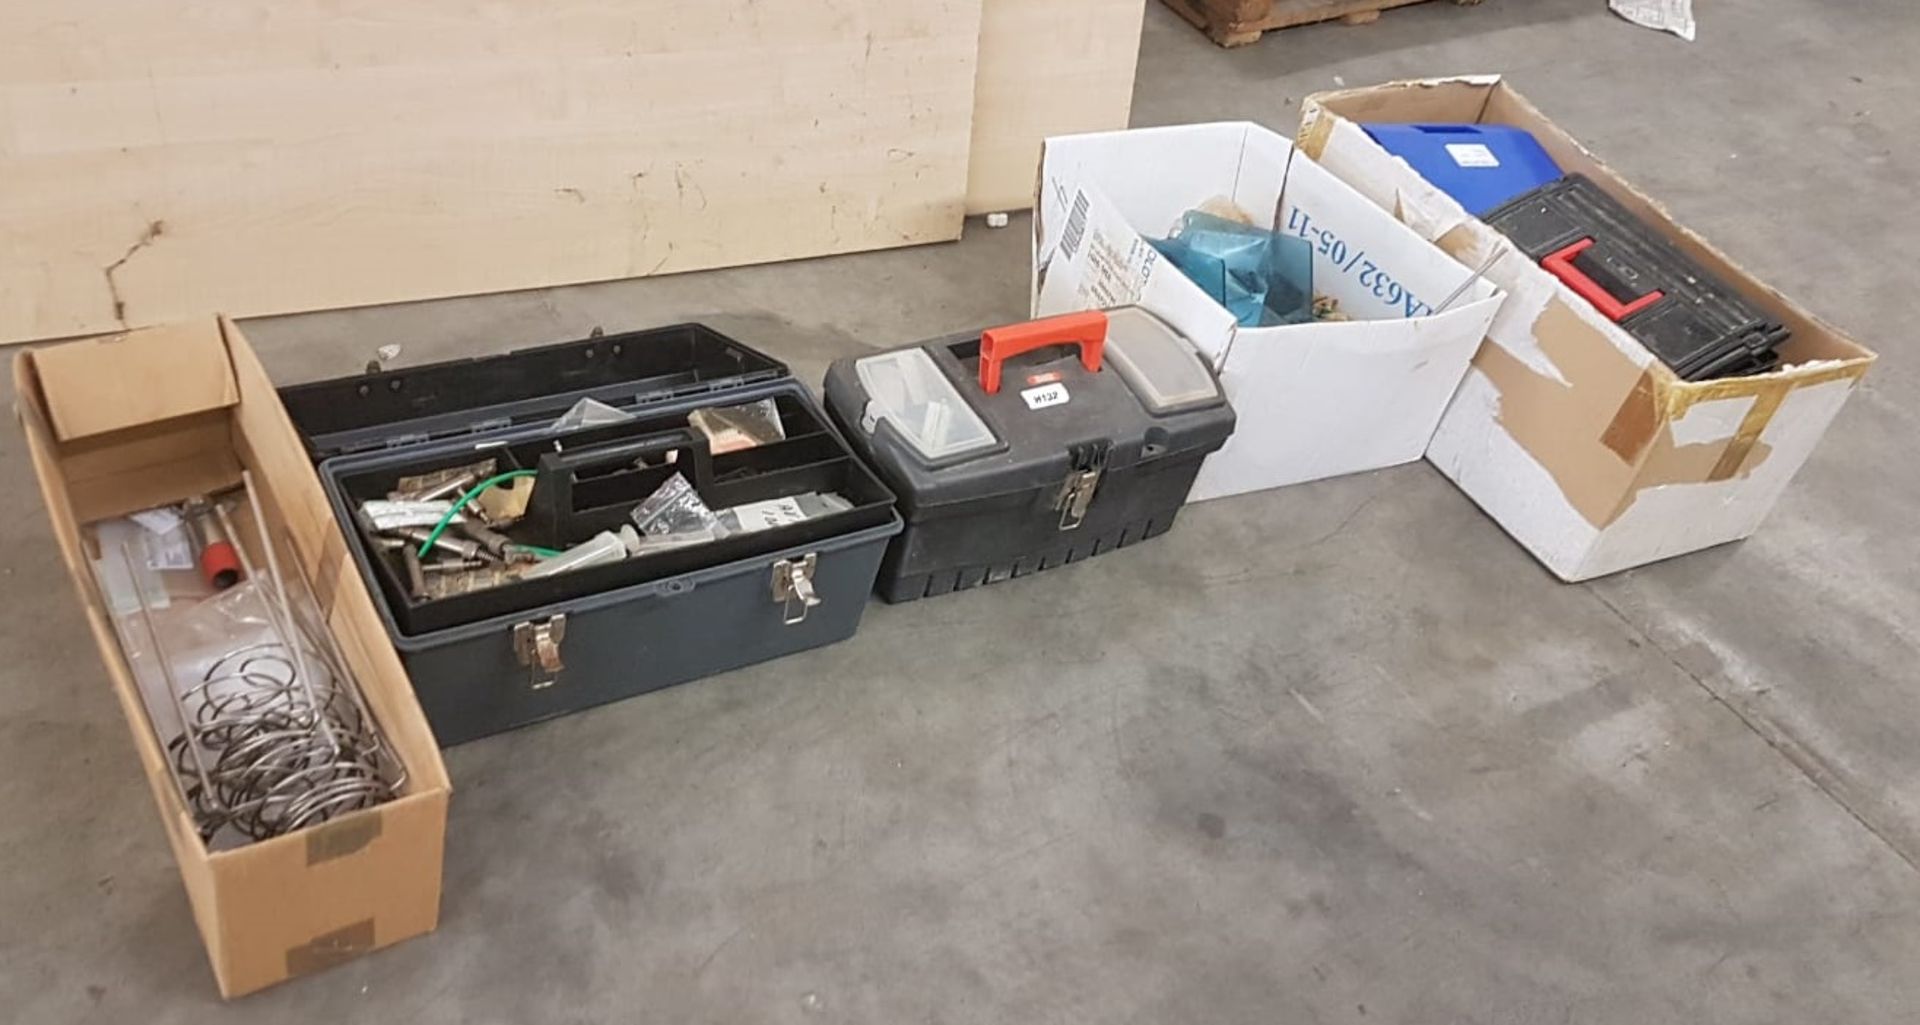 5 x Various Boxes of Assorted Items Including Tool Boxes  - CL404 - Ref H132 - Model Bandit IV - 8 - Image 2 of 18